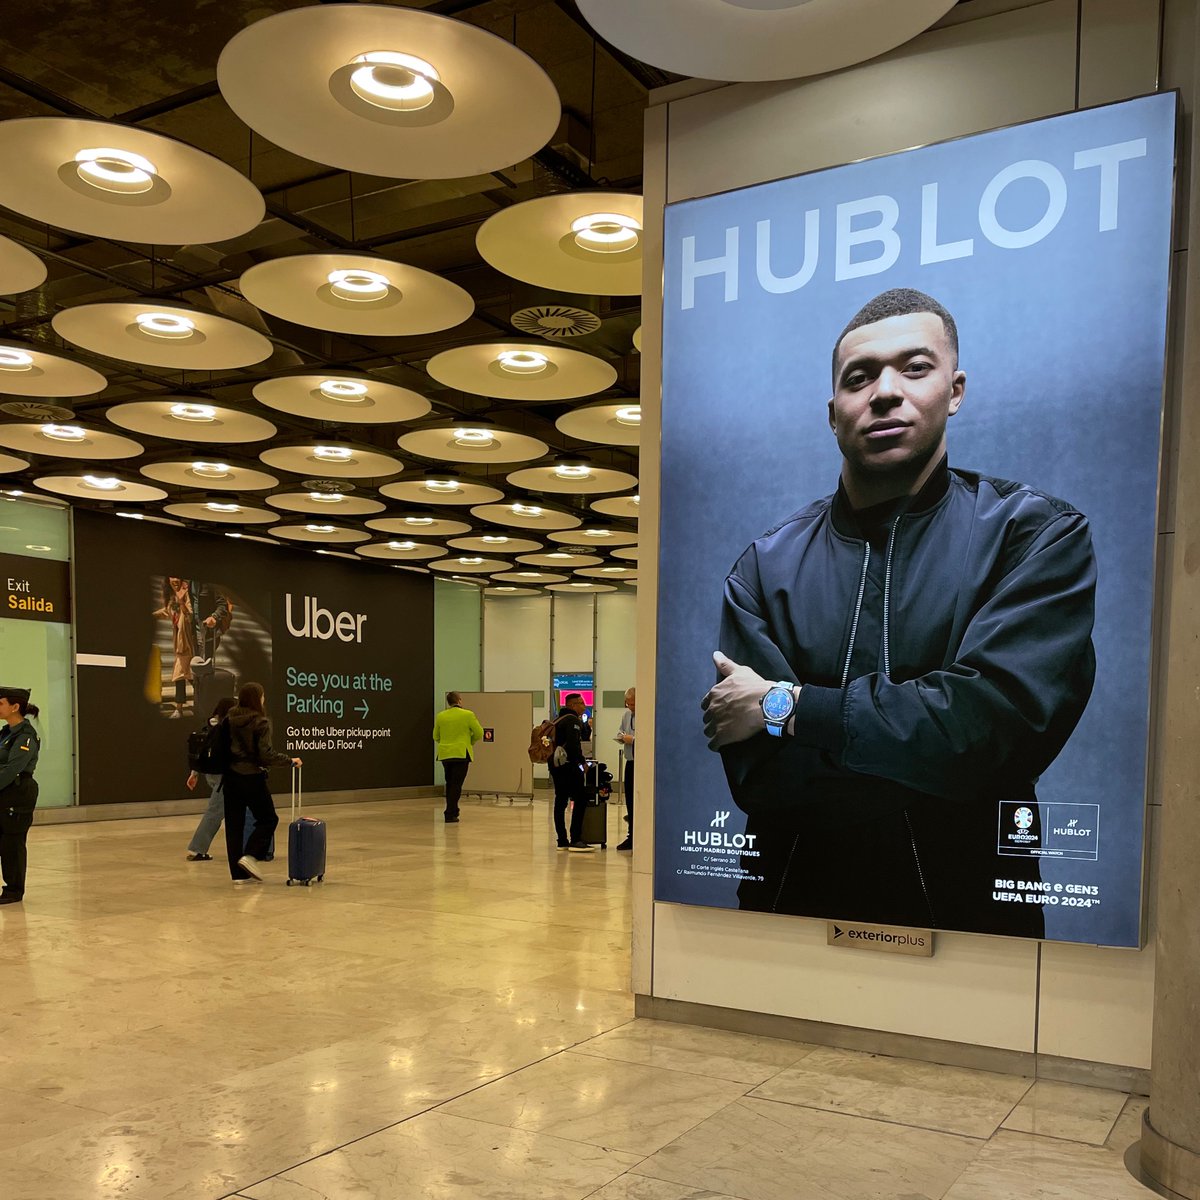 Kylian Mbappé at Madrid airport as an advisement for Hublot. ⌚🇫🇷👀